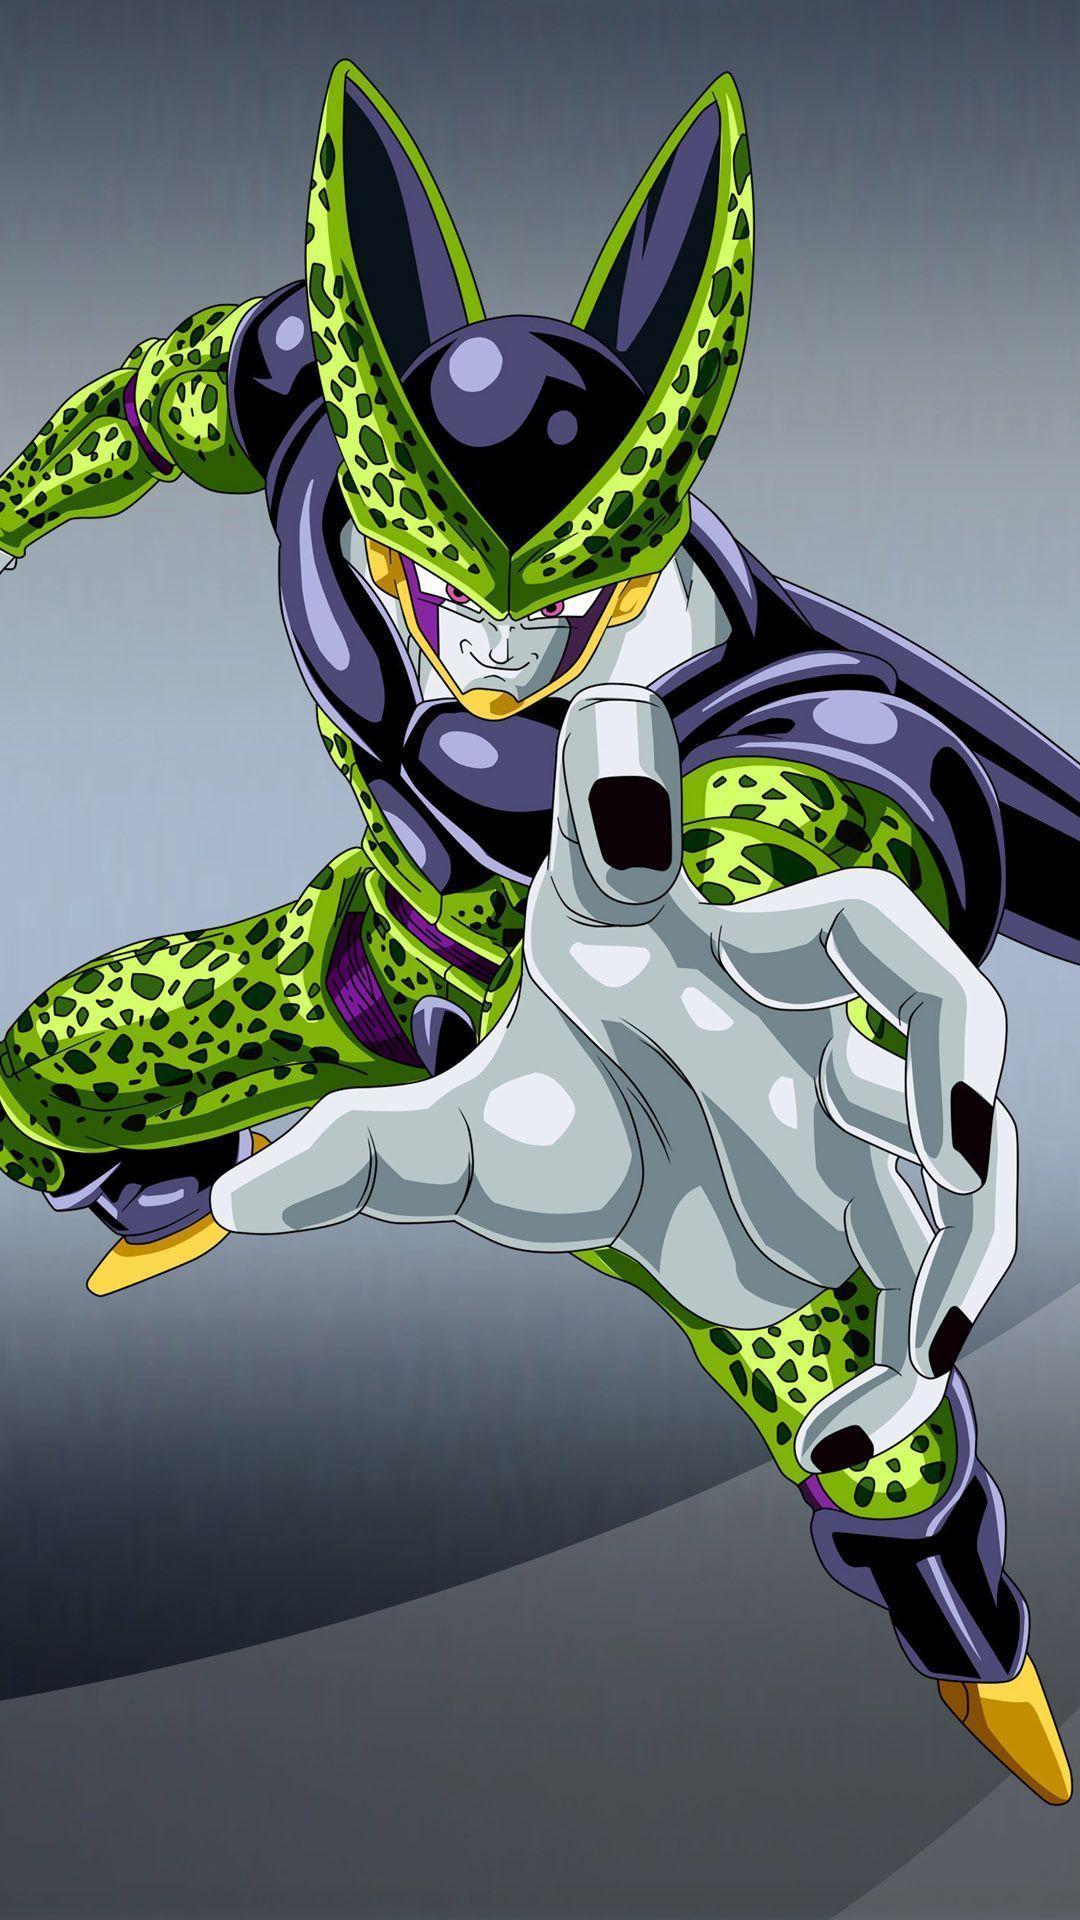 Aggregate 61+ perfect cell wallpaper best - in.cdgdbentre